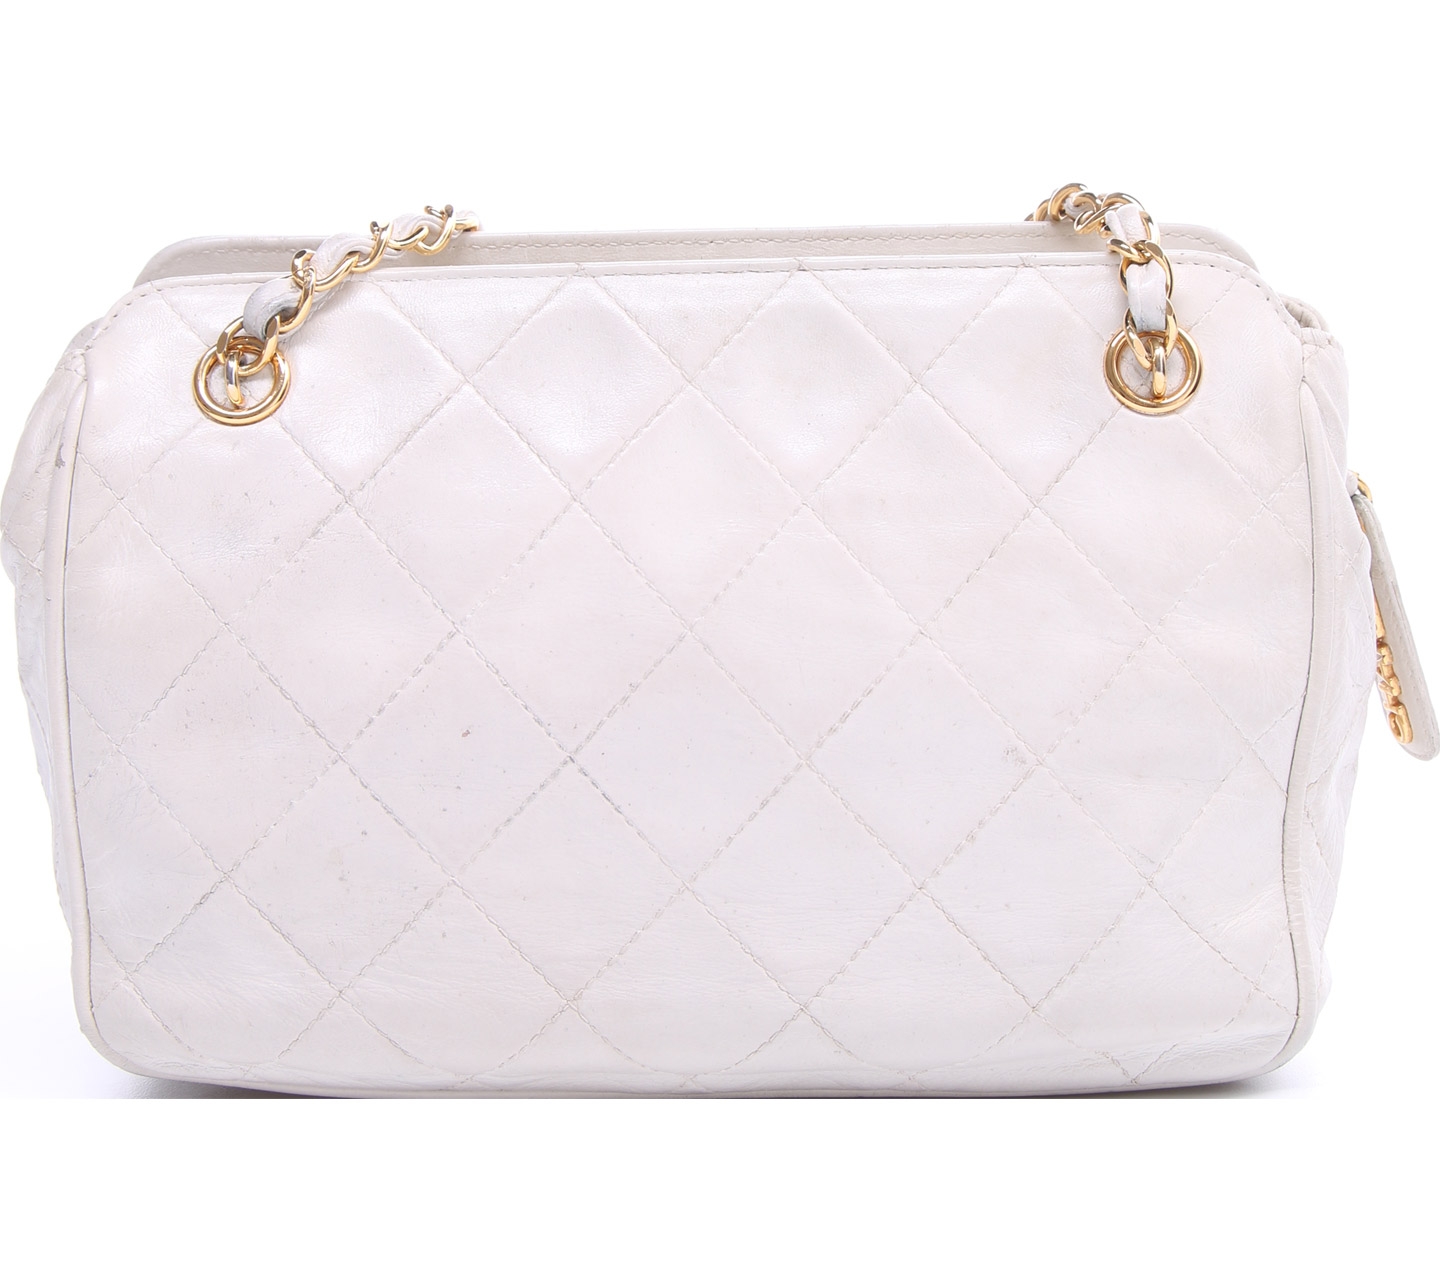 Chanel White Quilted Sling Bag